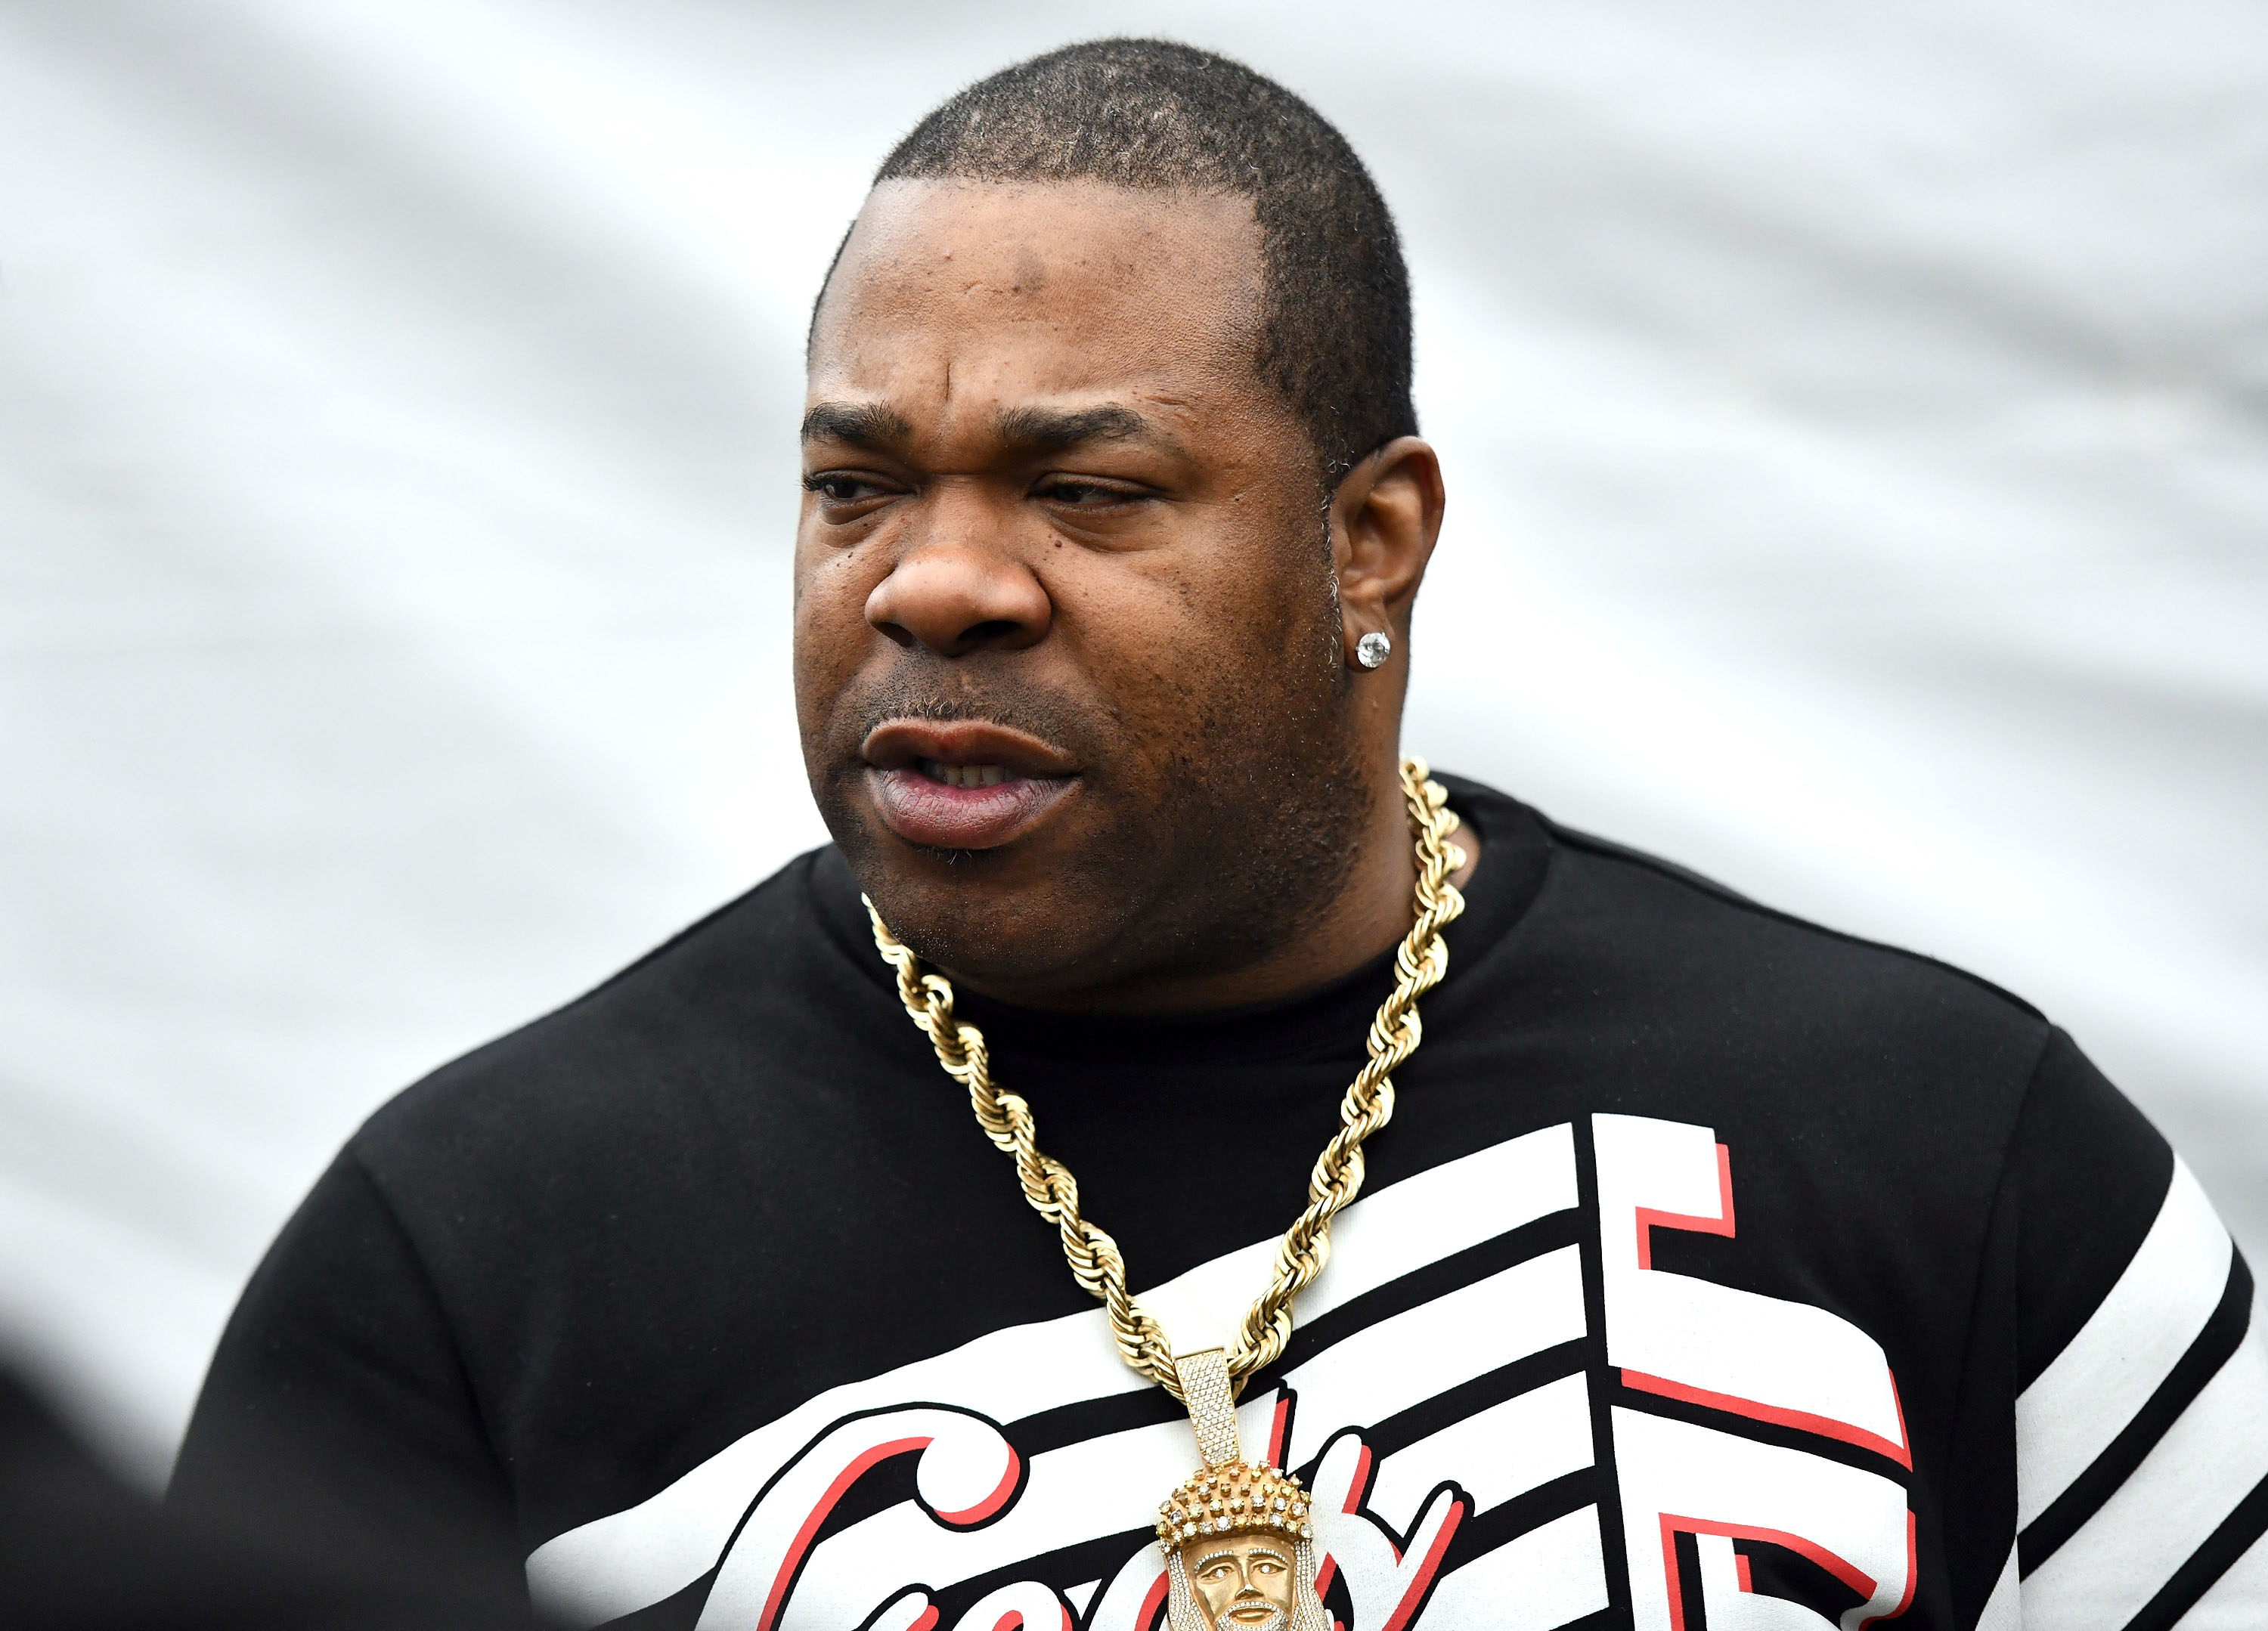 Busta Rhymes wearing a black and white graphic shirt and a gold chain necklace, looking to the side with a neutral expression